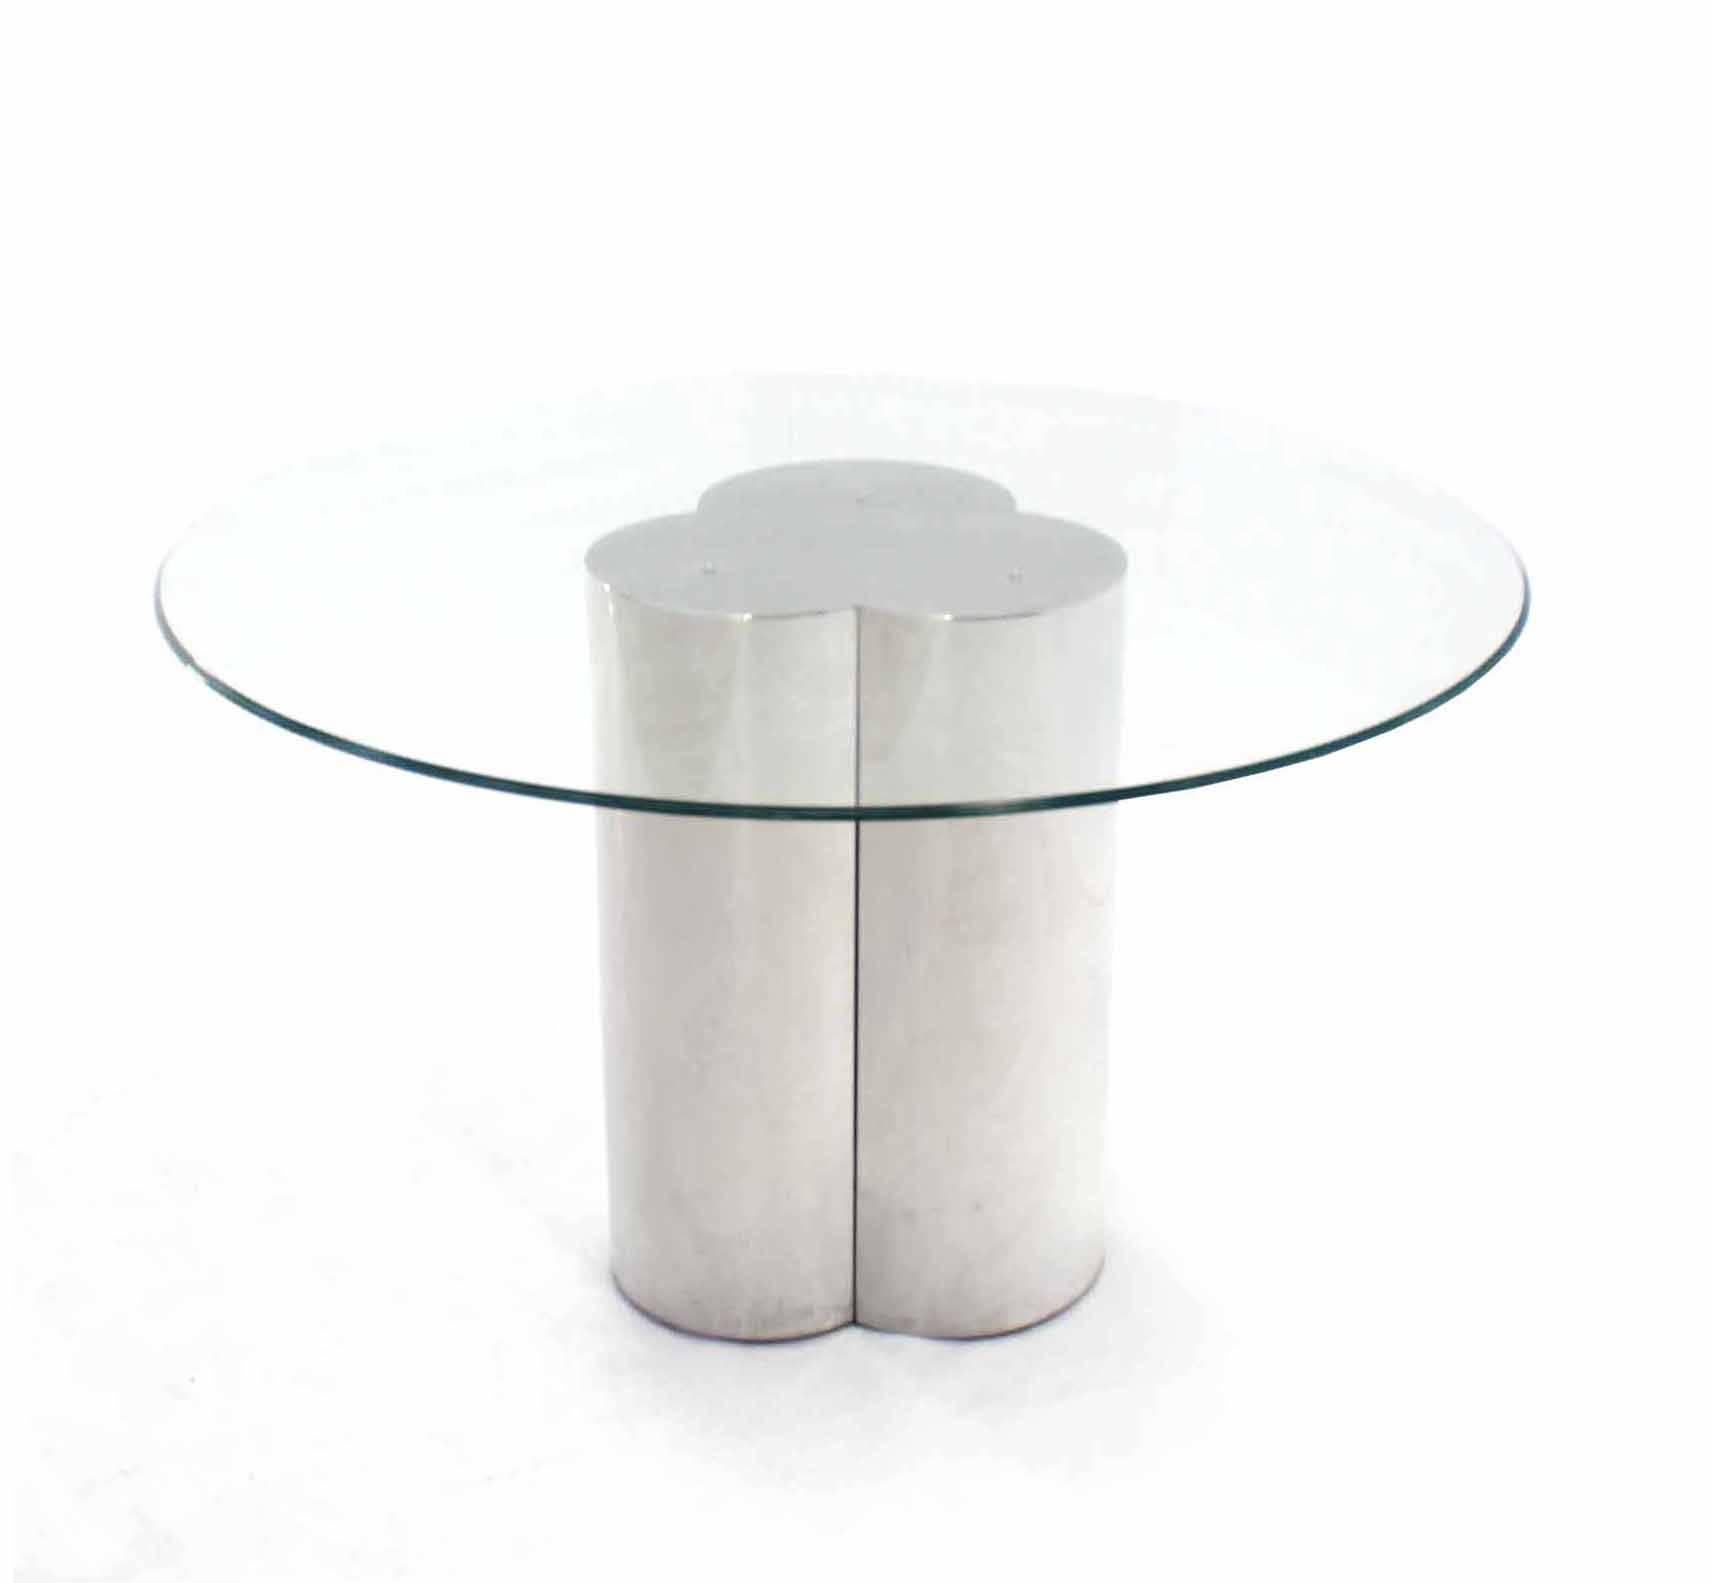 Nice figural chrome or stainless steel base round dining table.